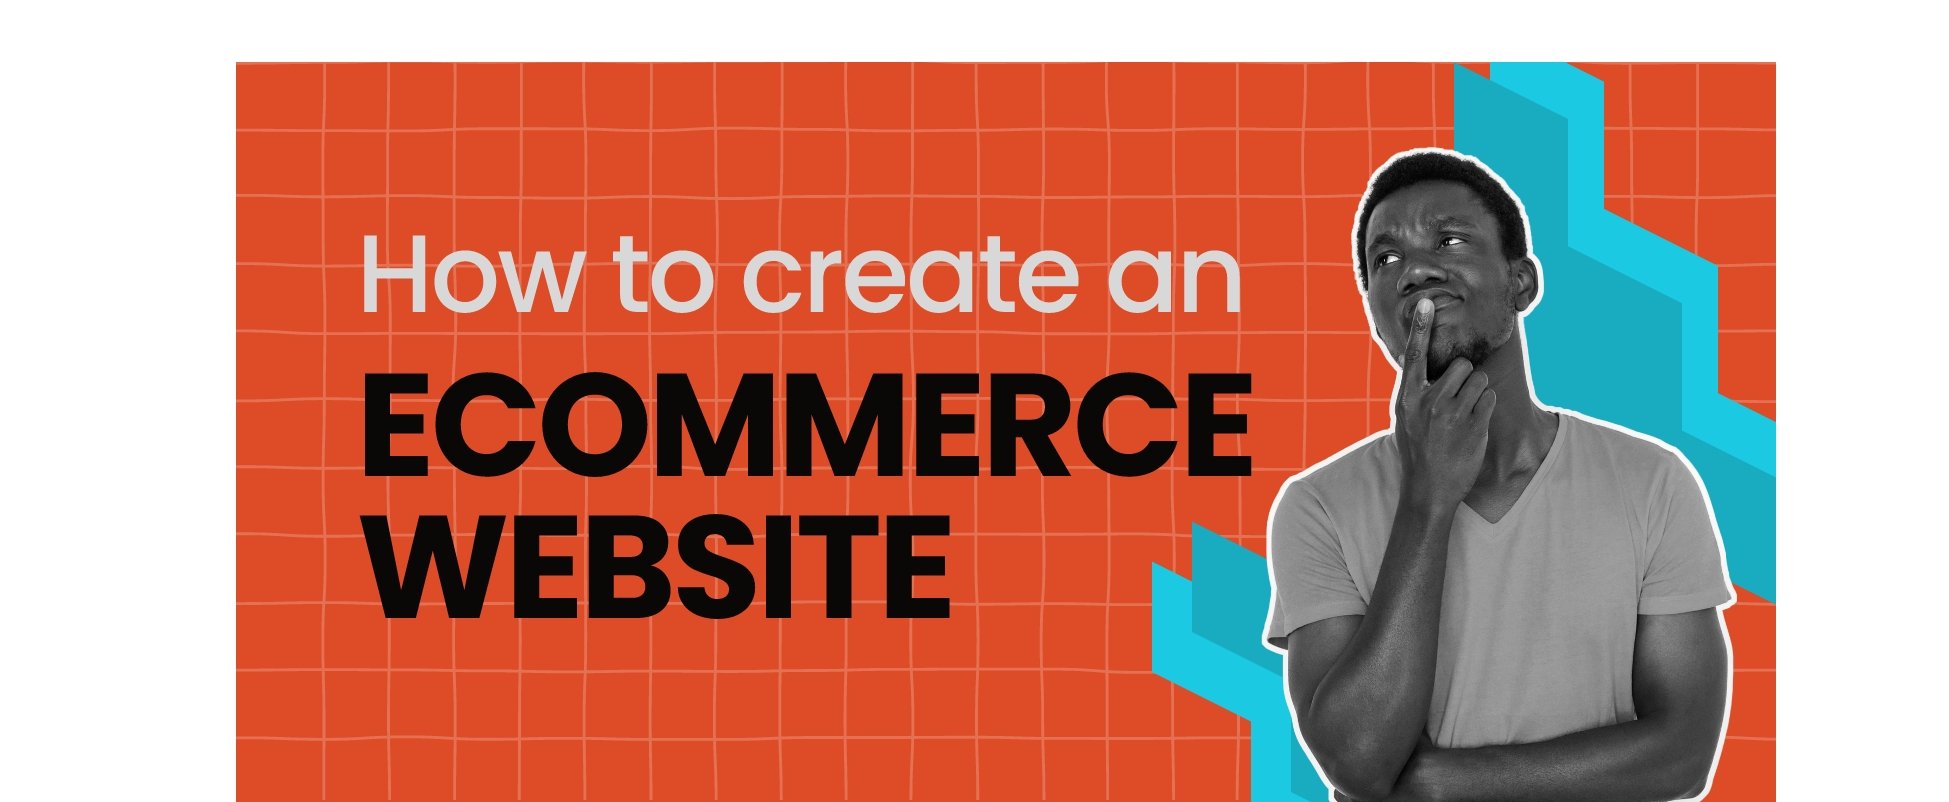 How to Create an Ecommerce Website in 8 Steps